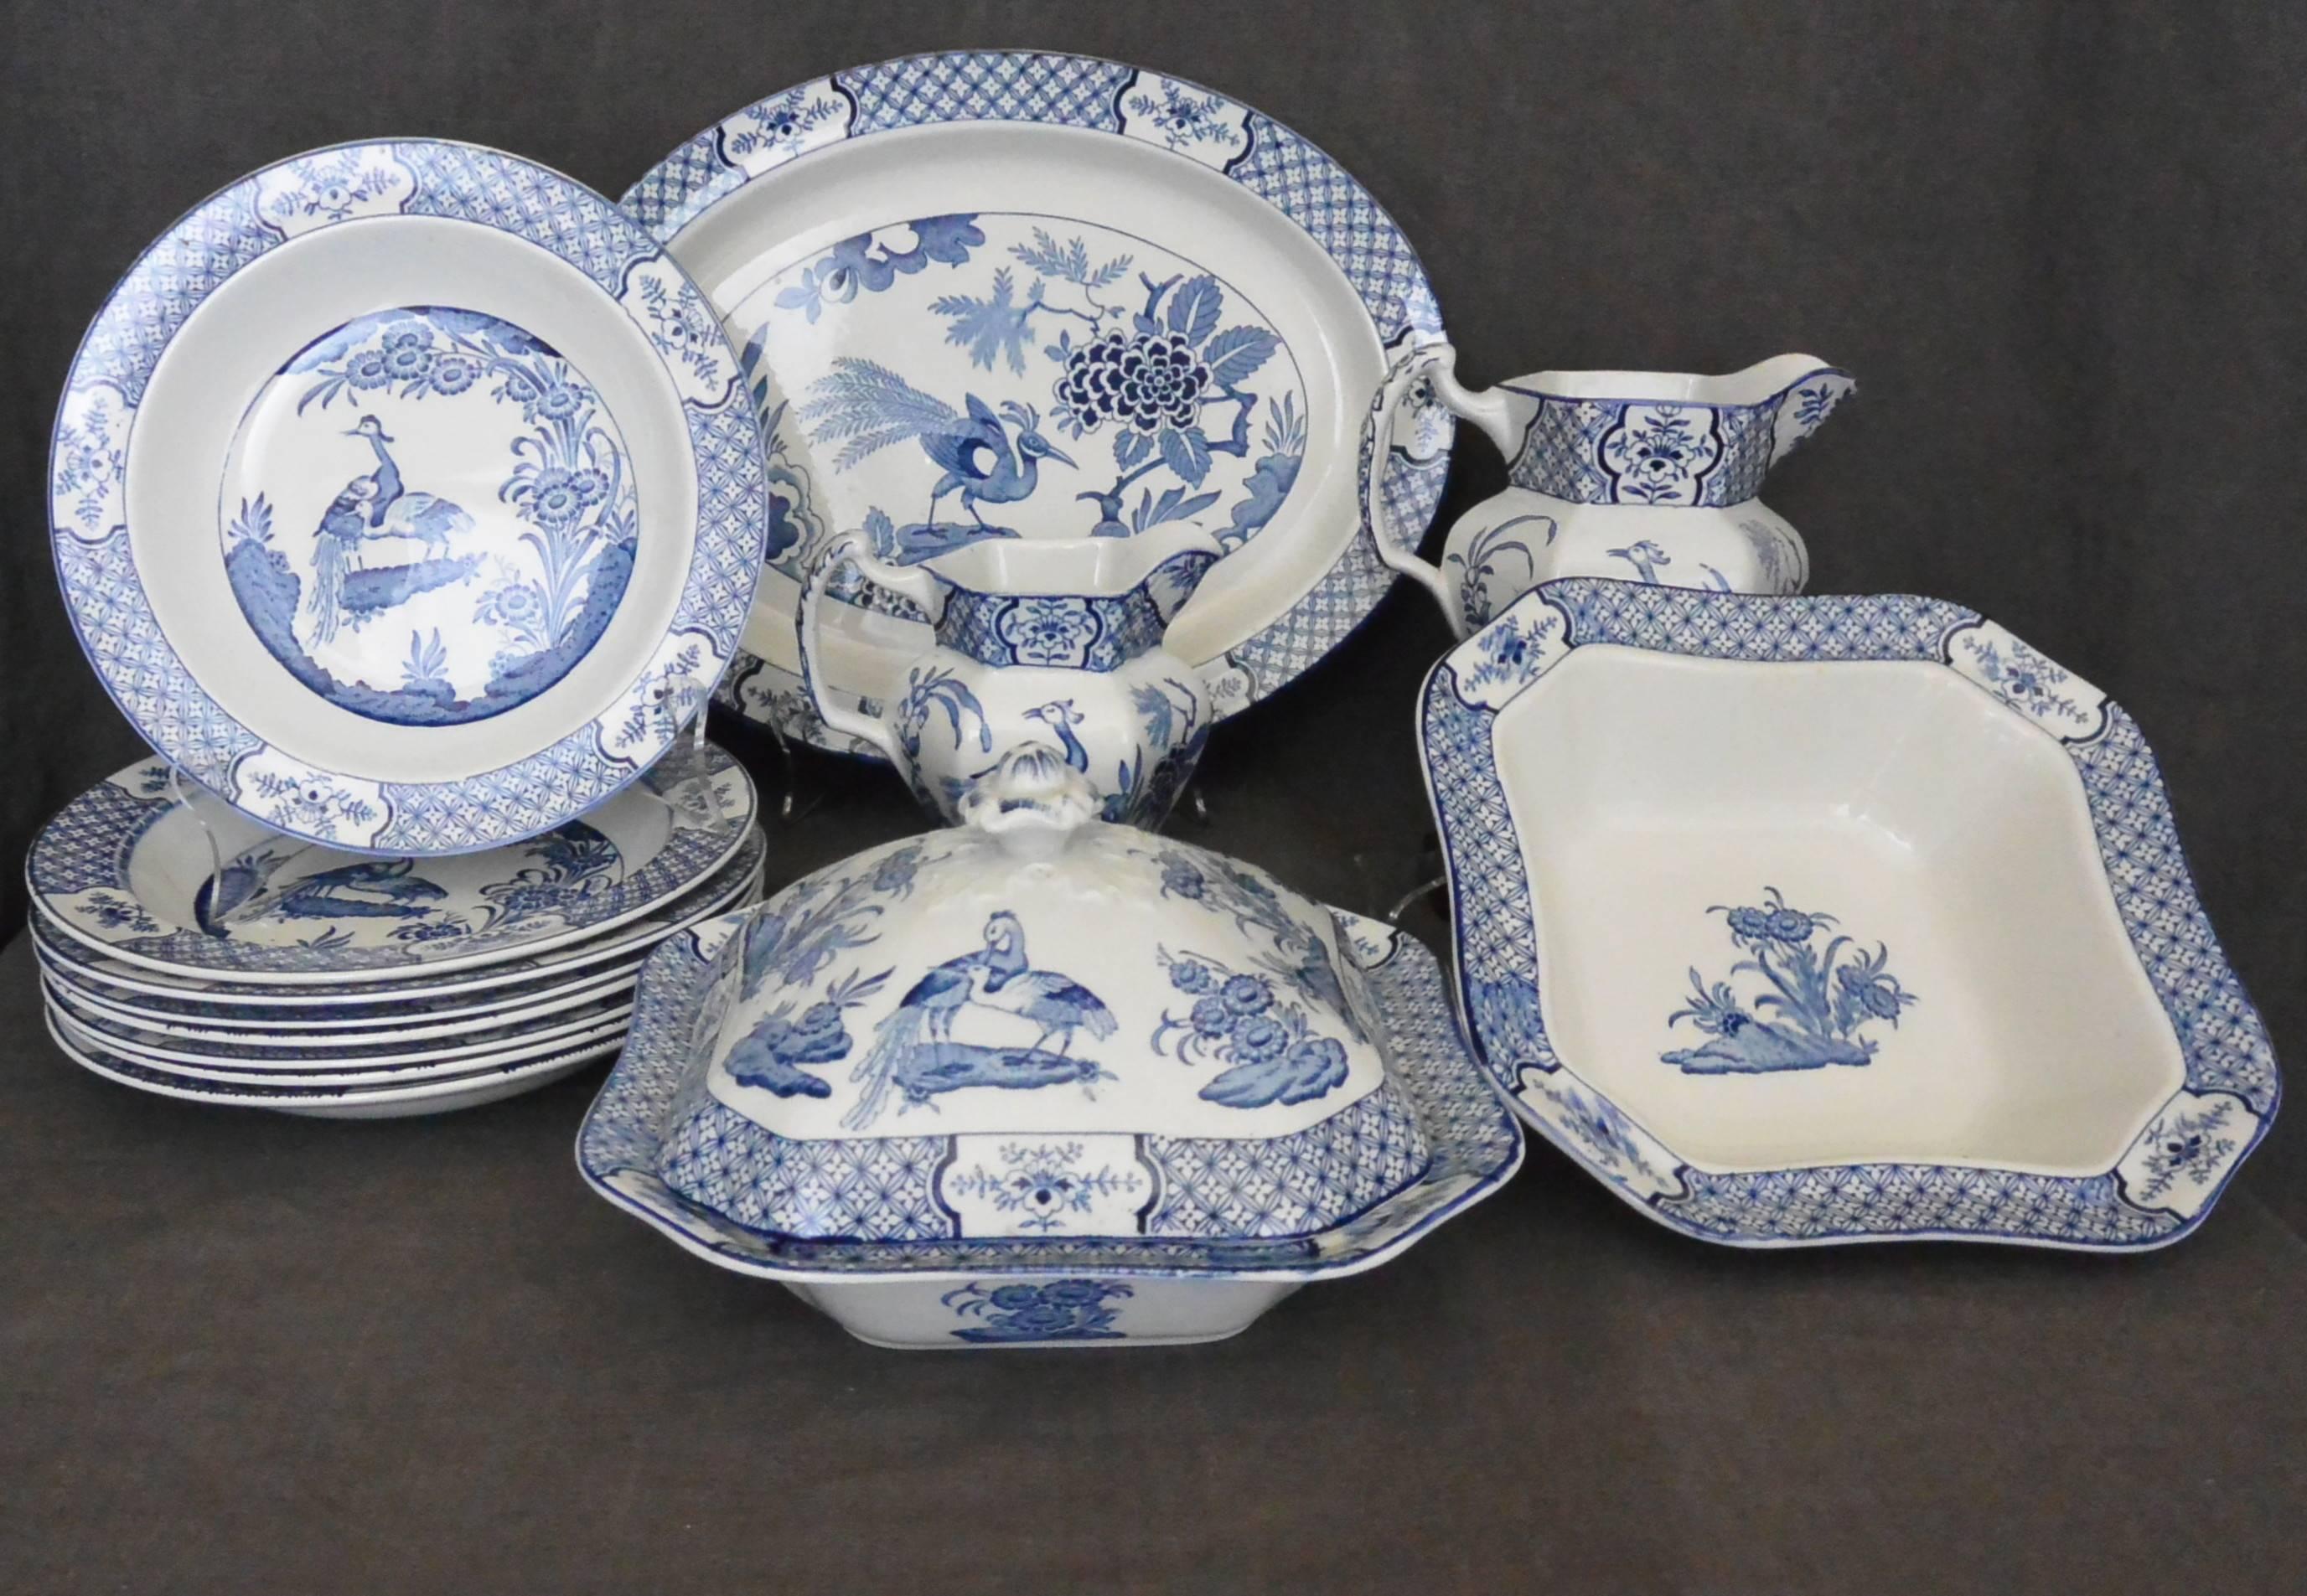 Decorative blue and white chinoiserie 